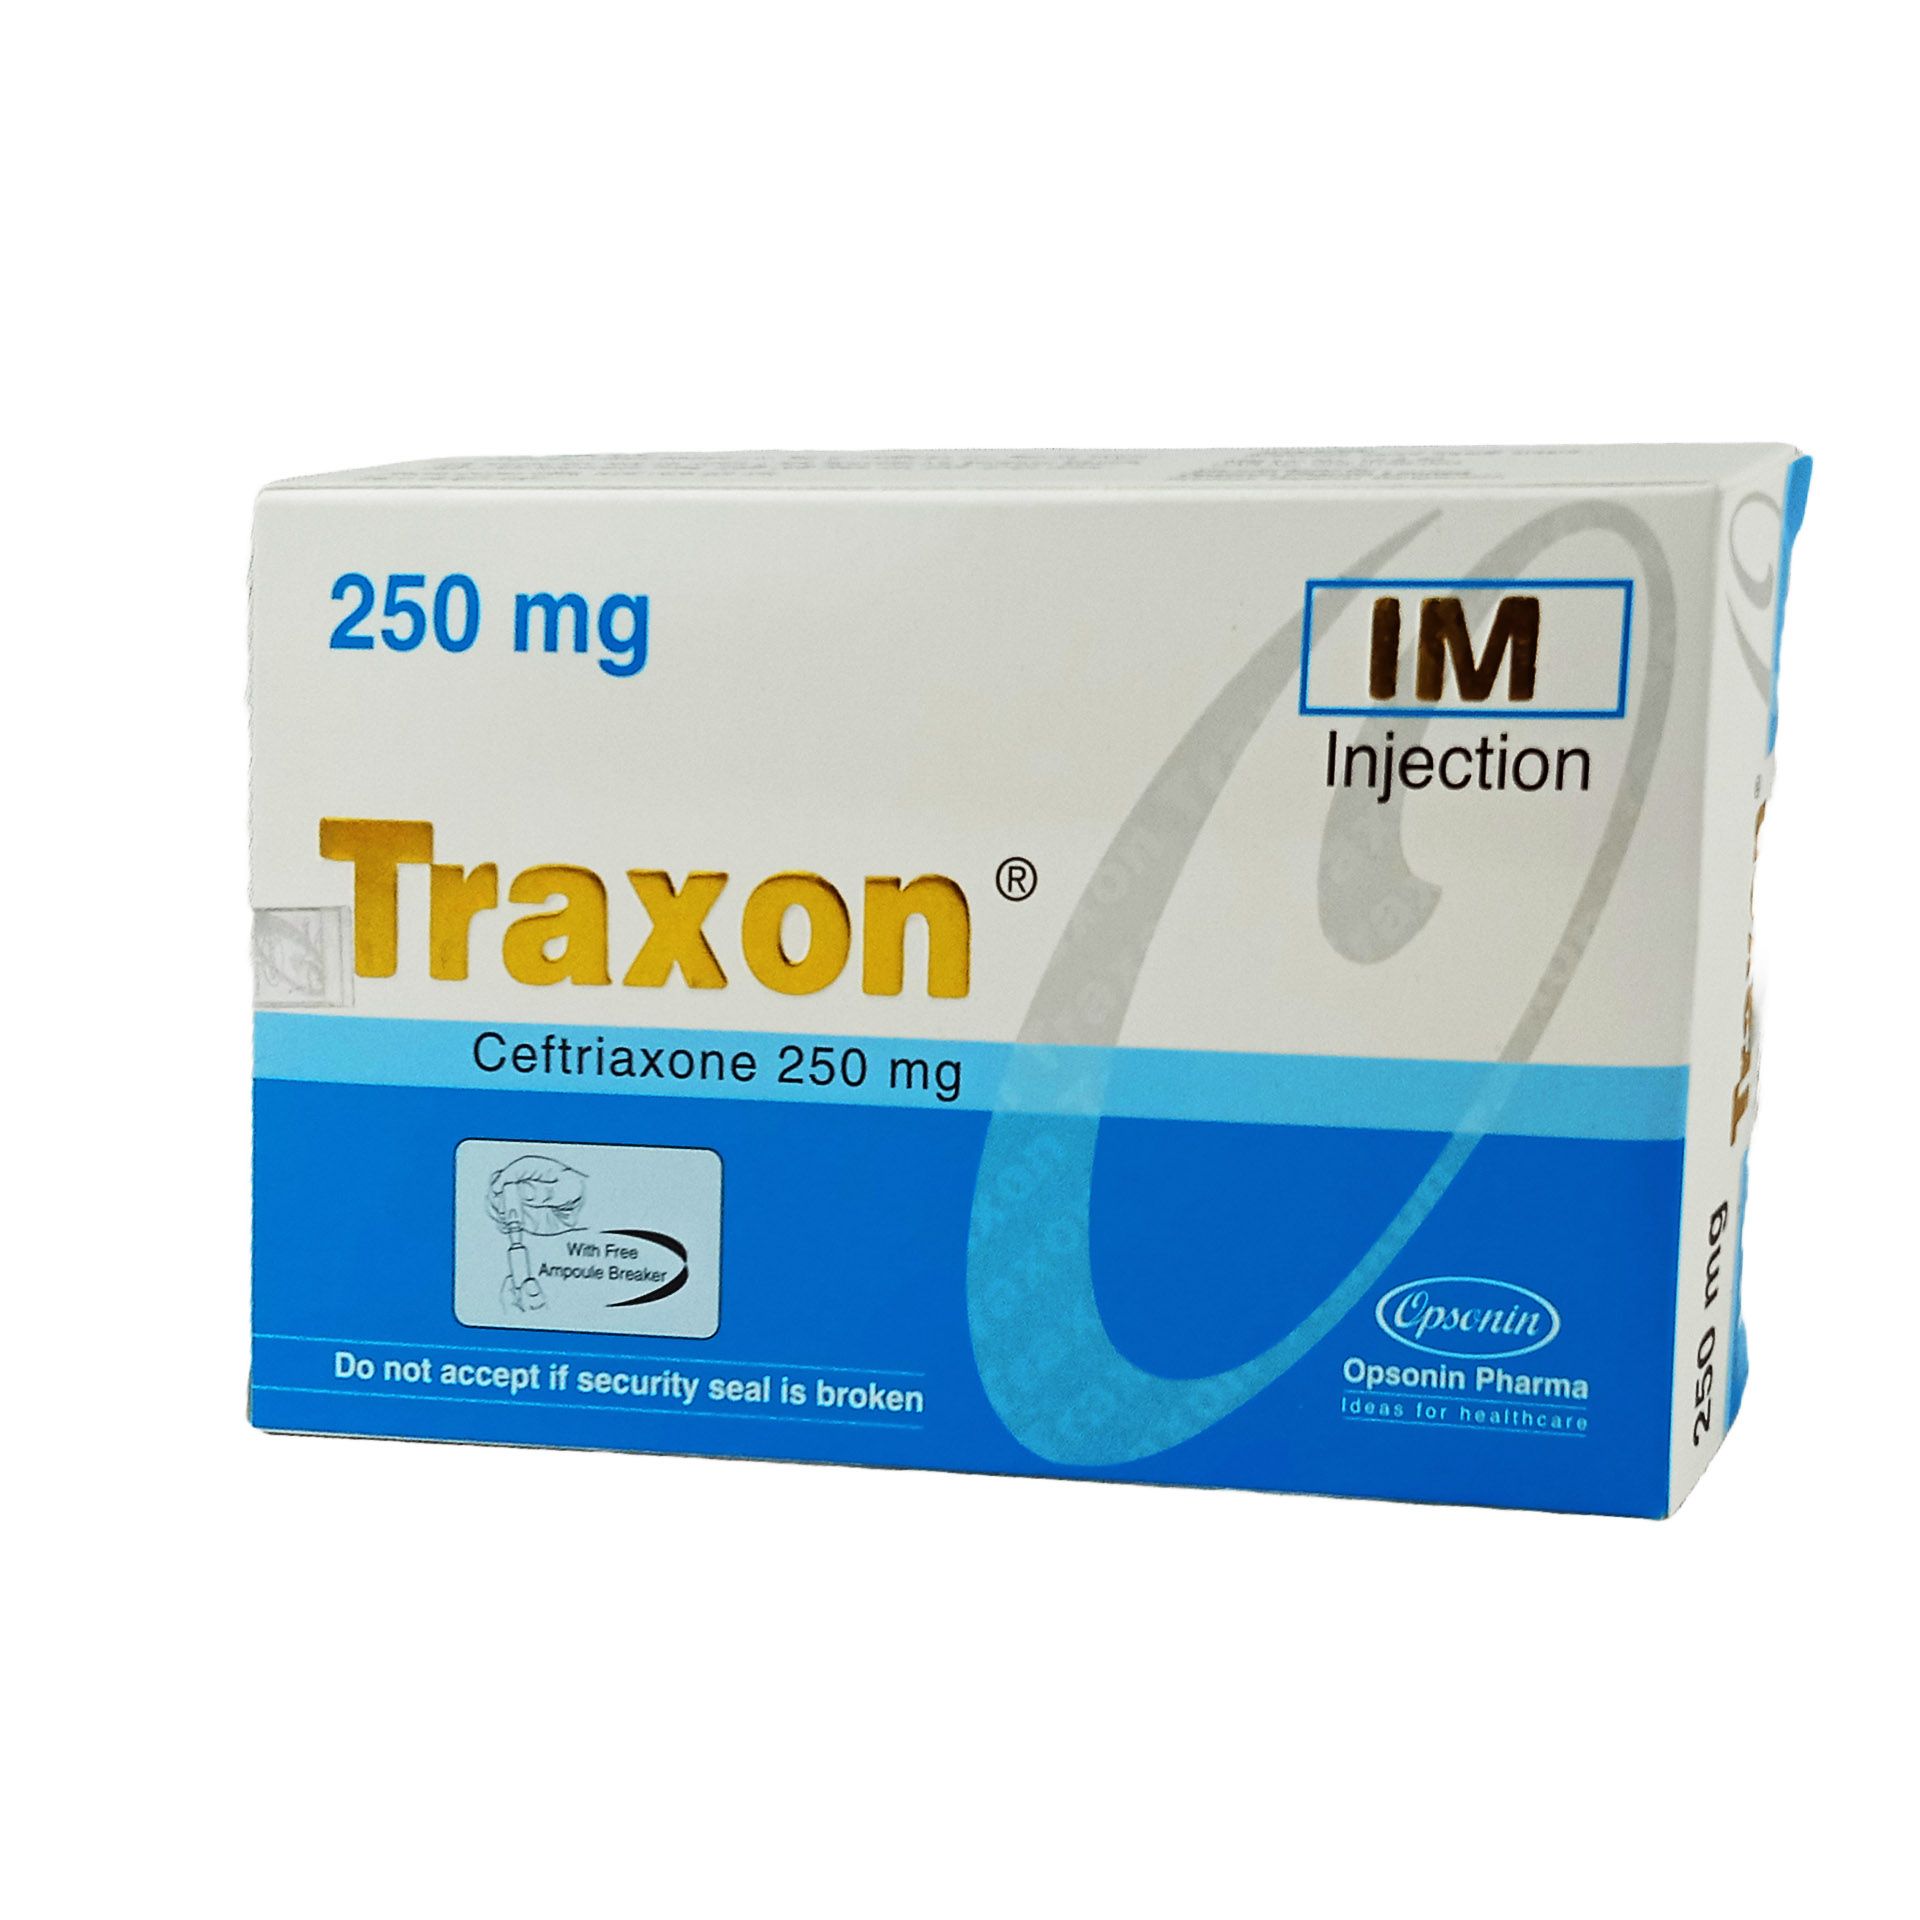 Traxon IM 250mg/vial Injection